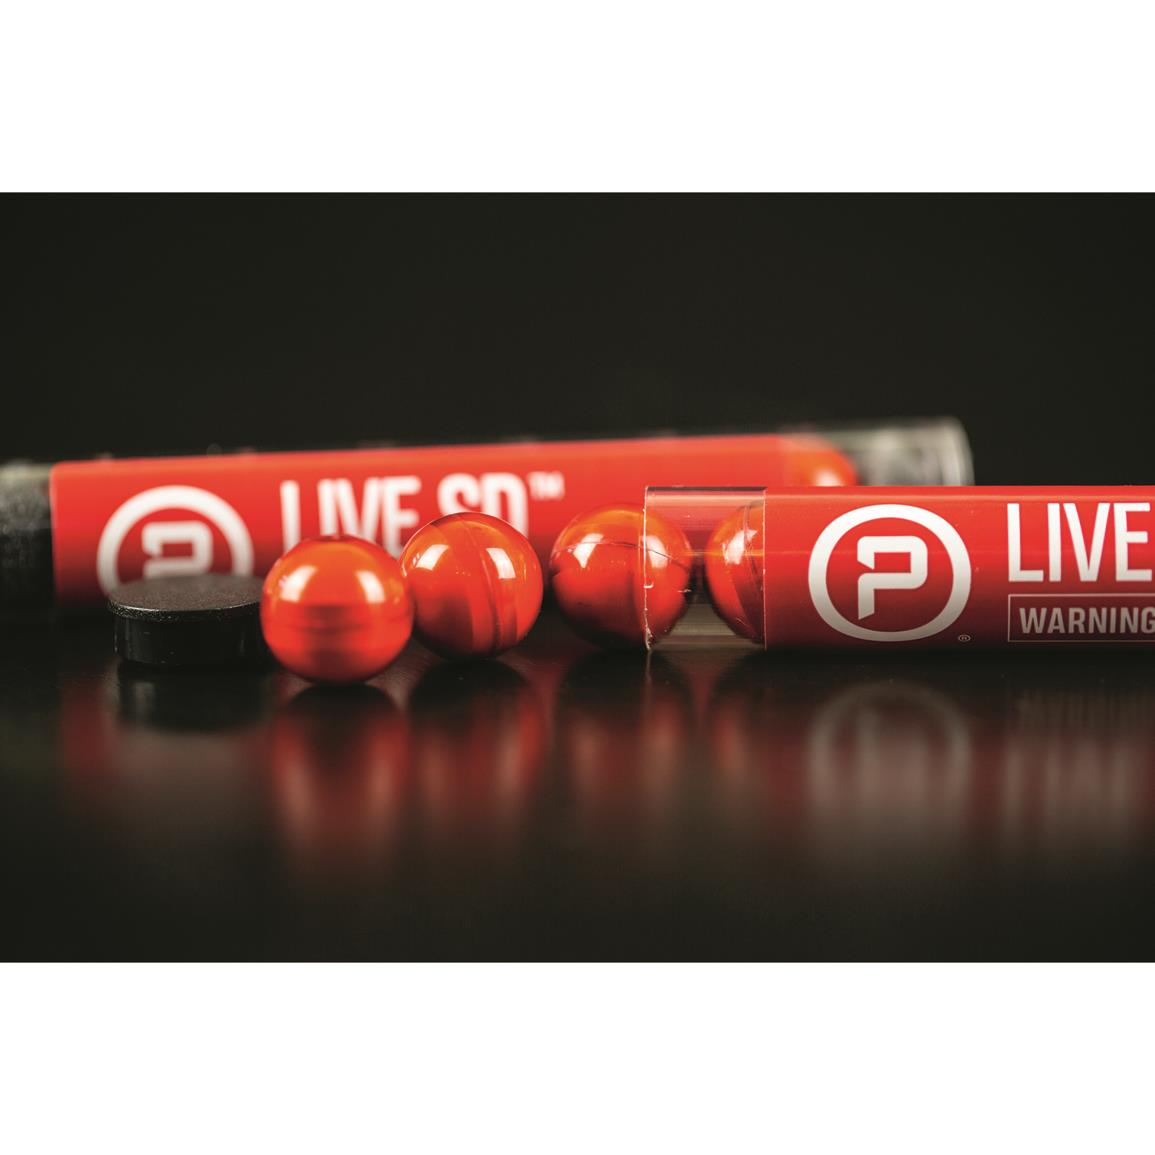 PepperBall .68 cal. Live SD Projectiles, 10 Rounds